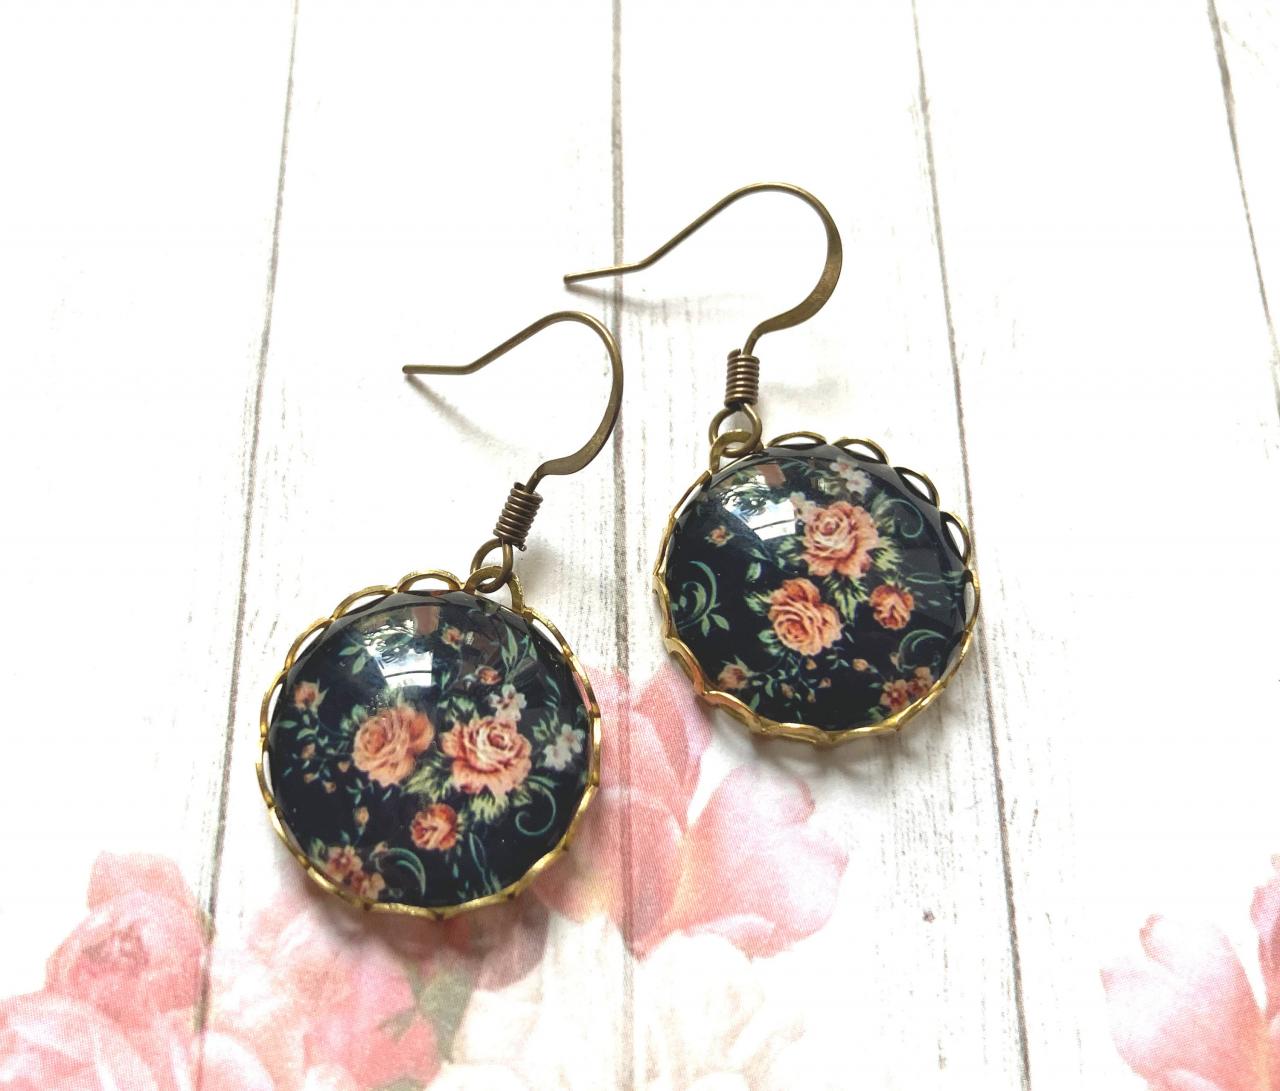 Brass Earrings With Flower Pendants And Lace Edge, Antique Style Brass, Selma Dreams